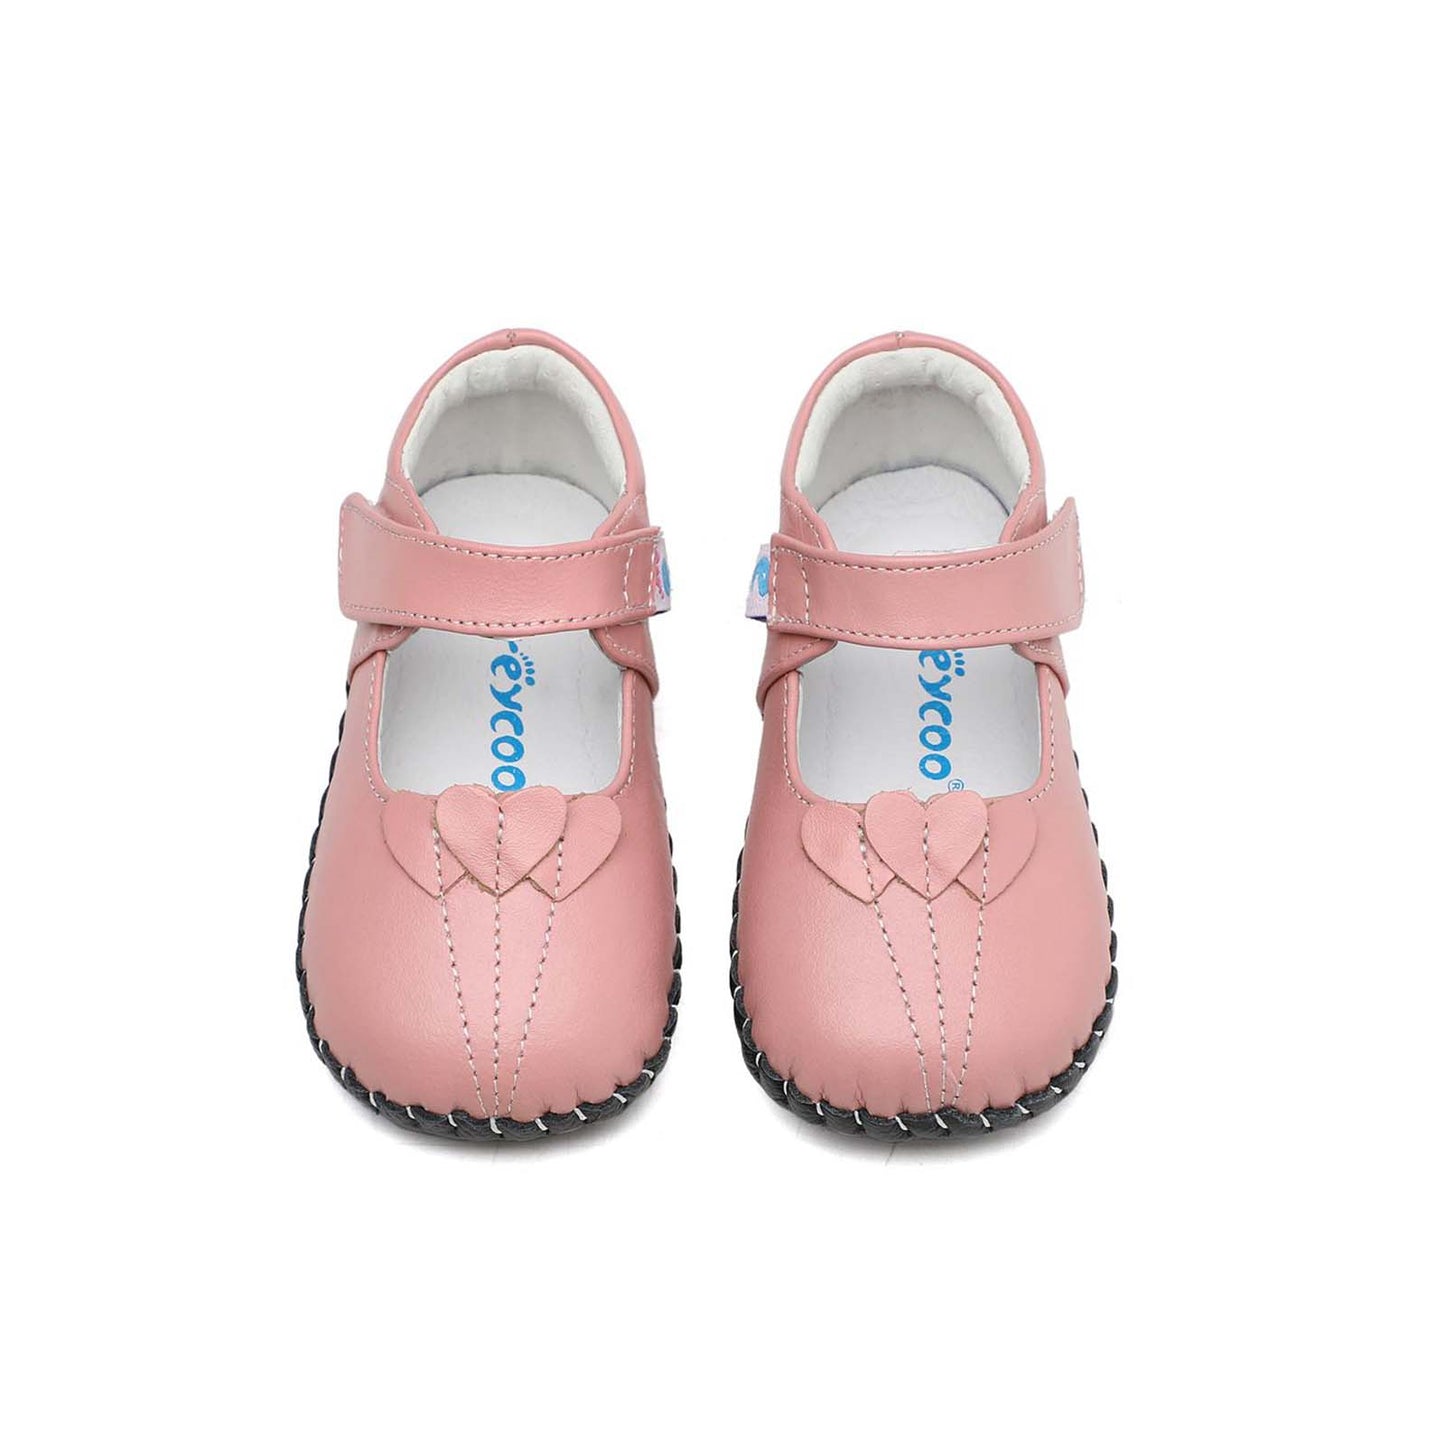 Freycoo - Pink Hailey Infant Shoes